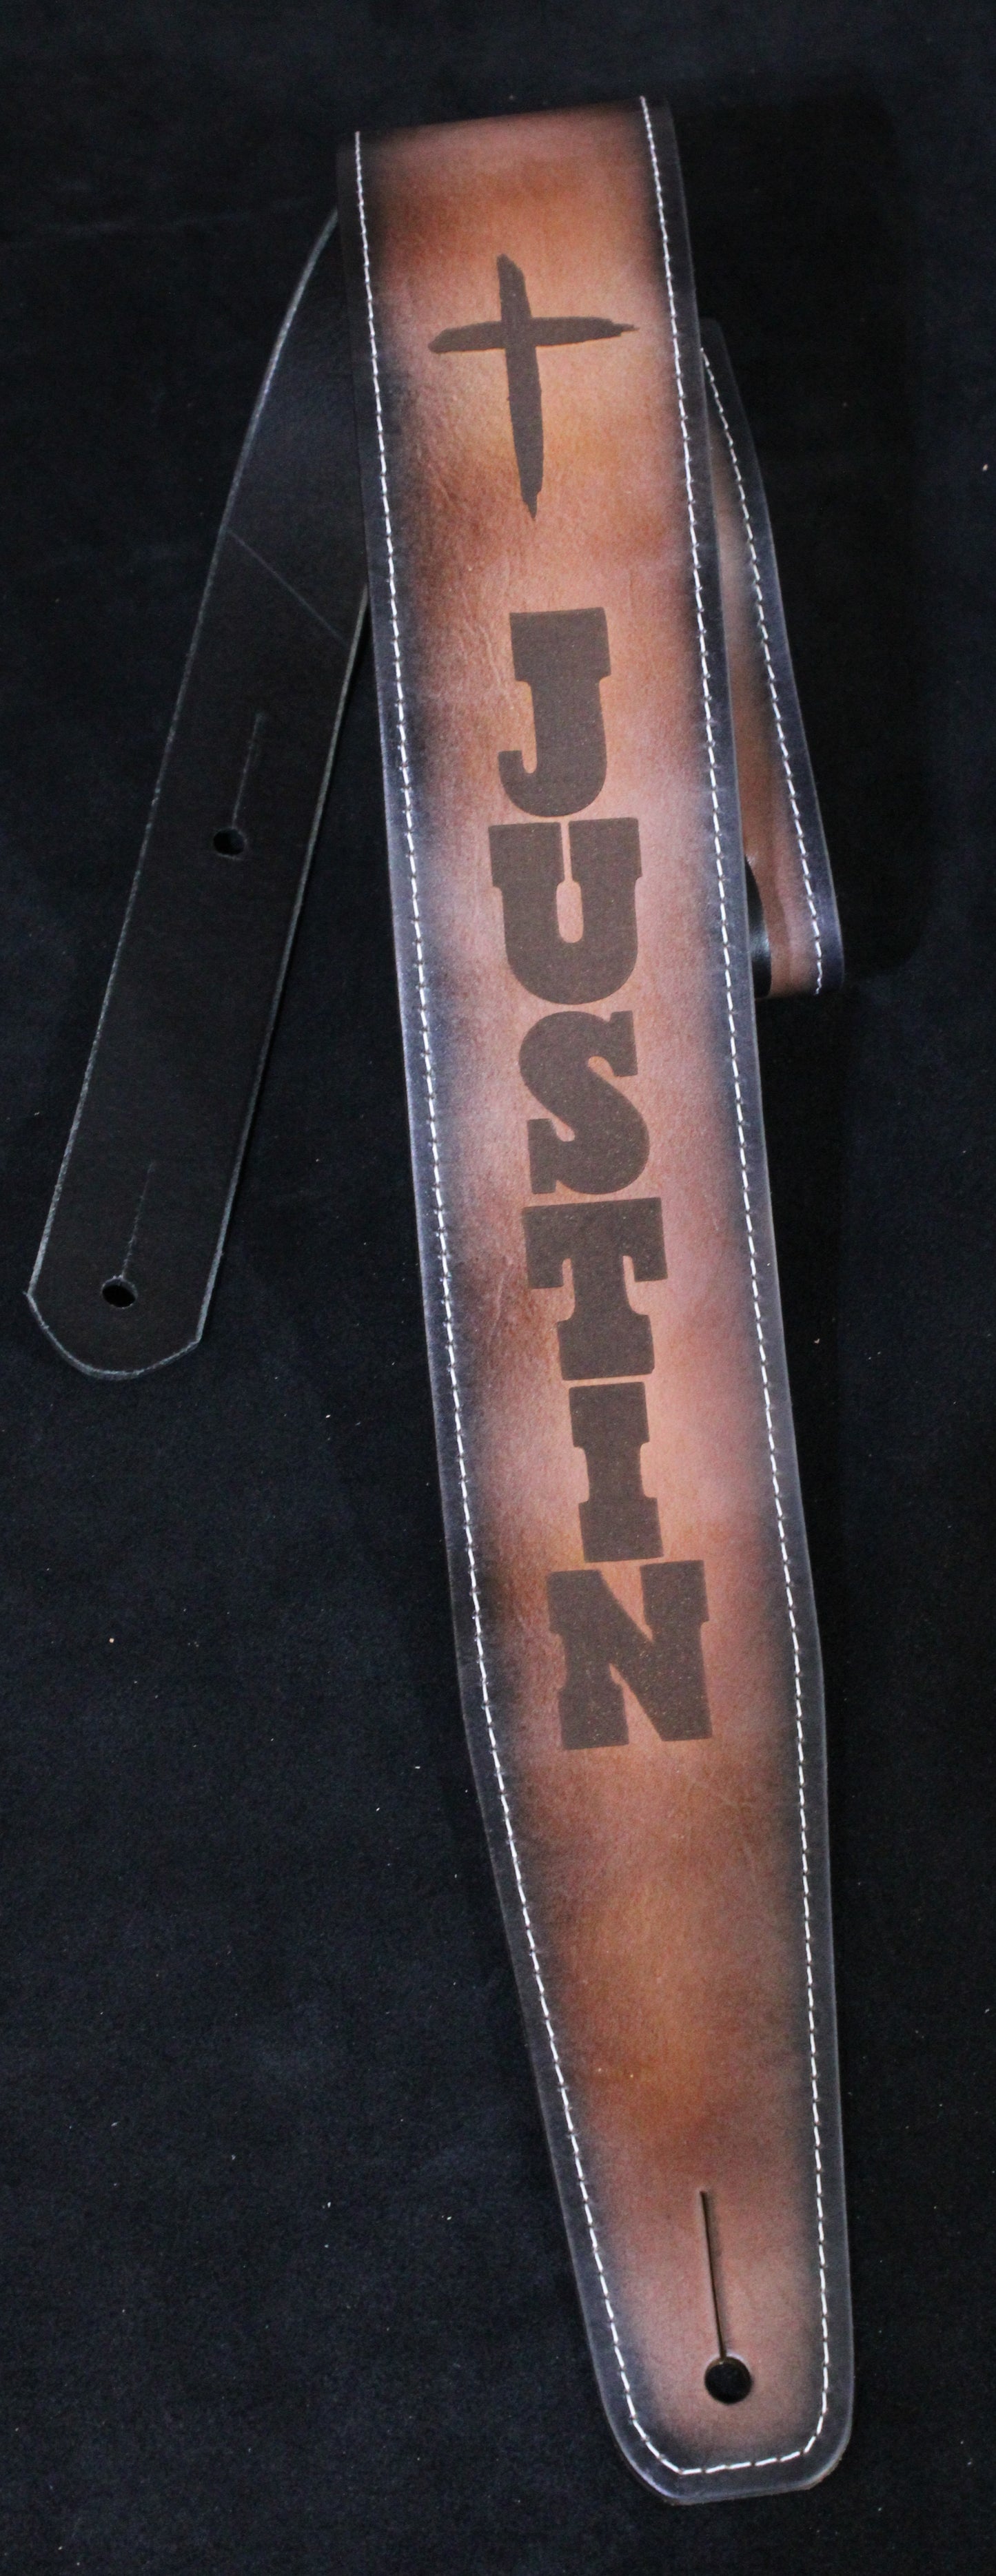 Stitched brown leather guitar strap